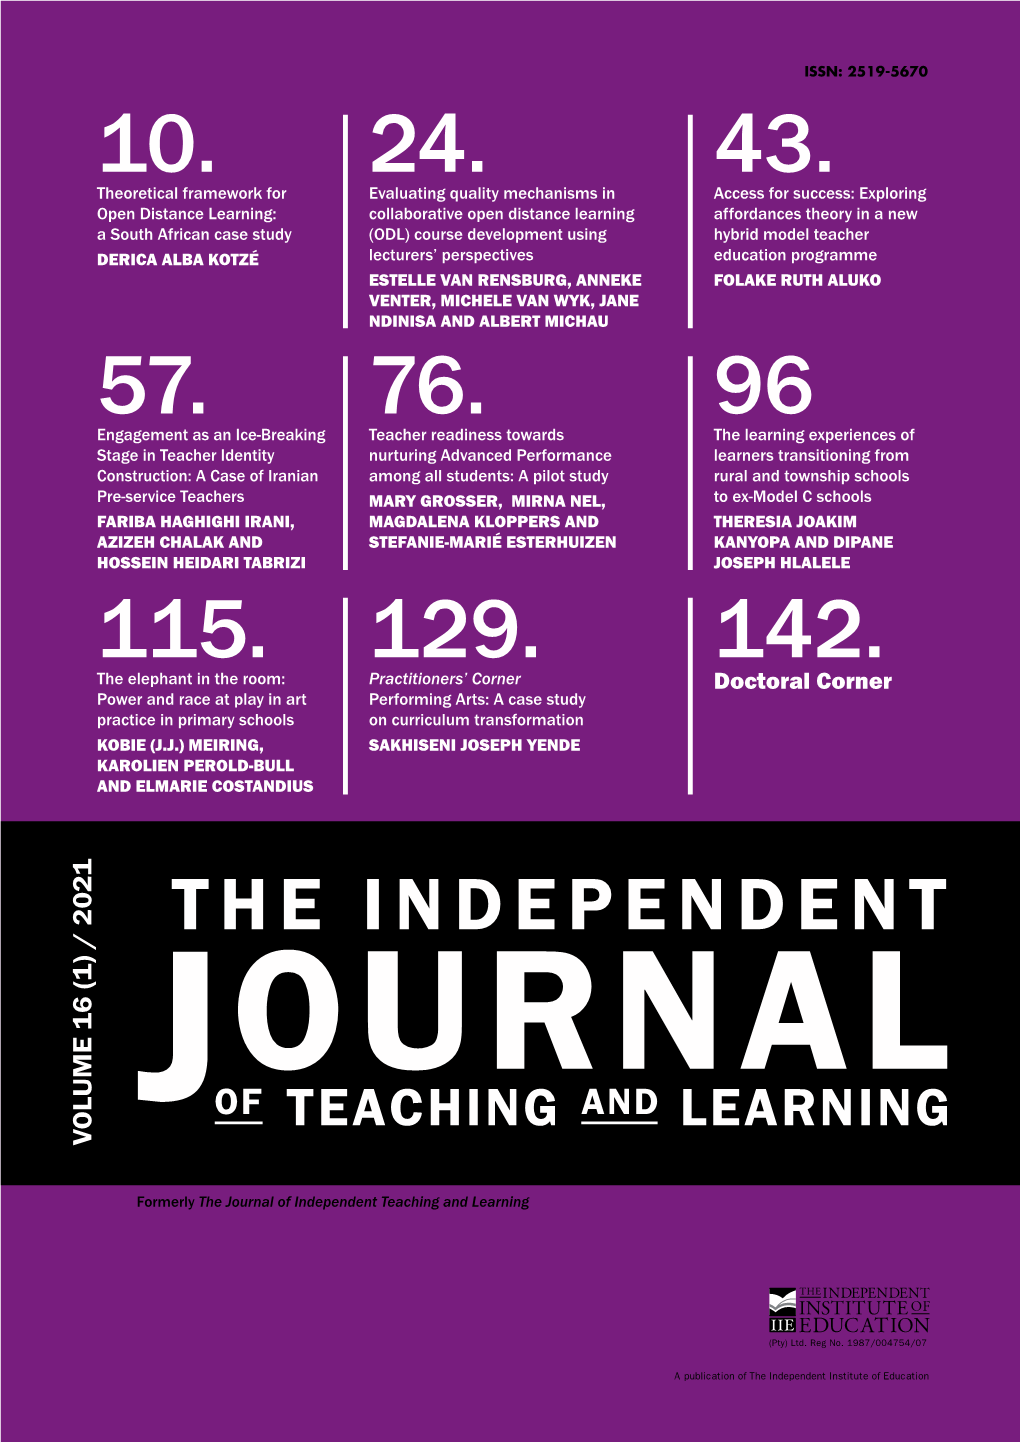 The Independent Journal of Teaching and Learning